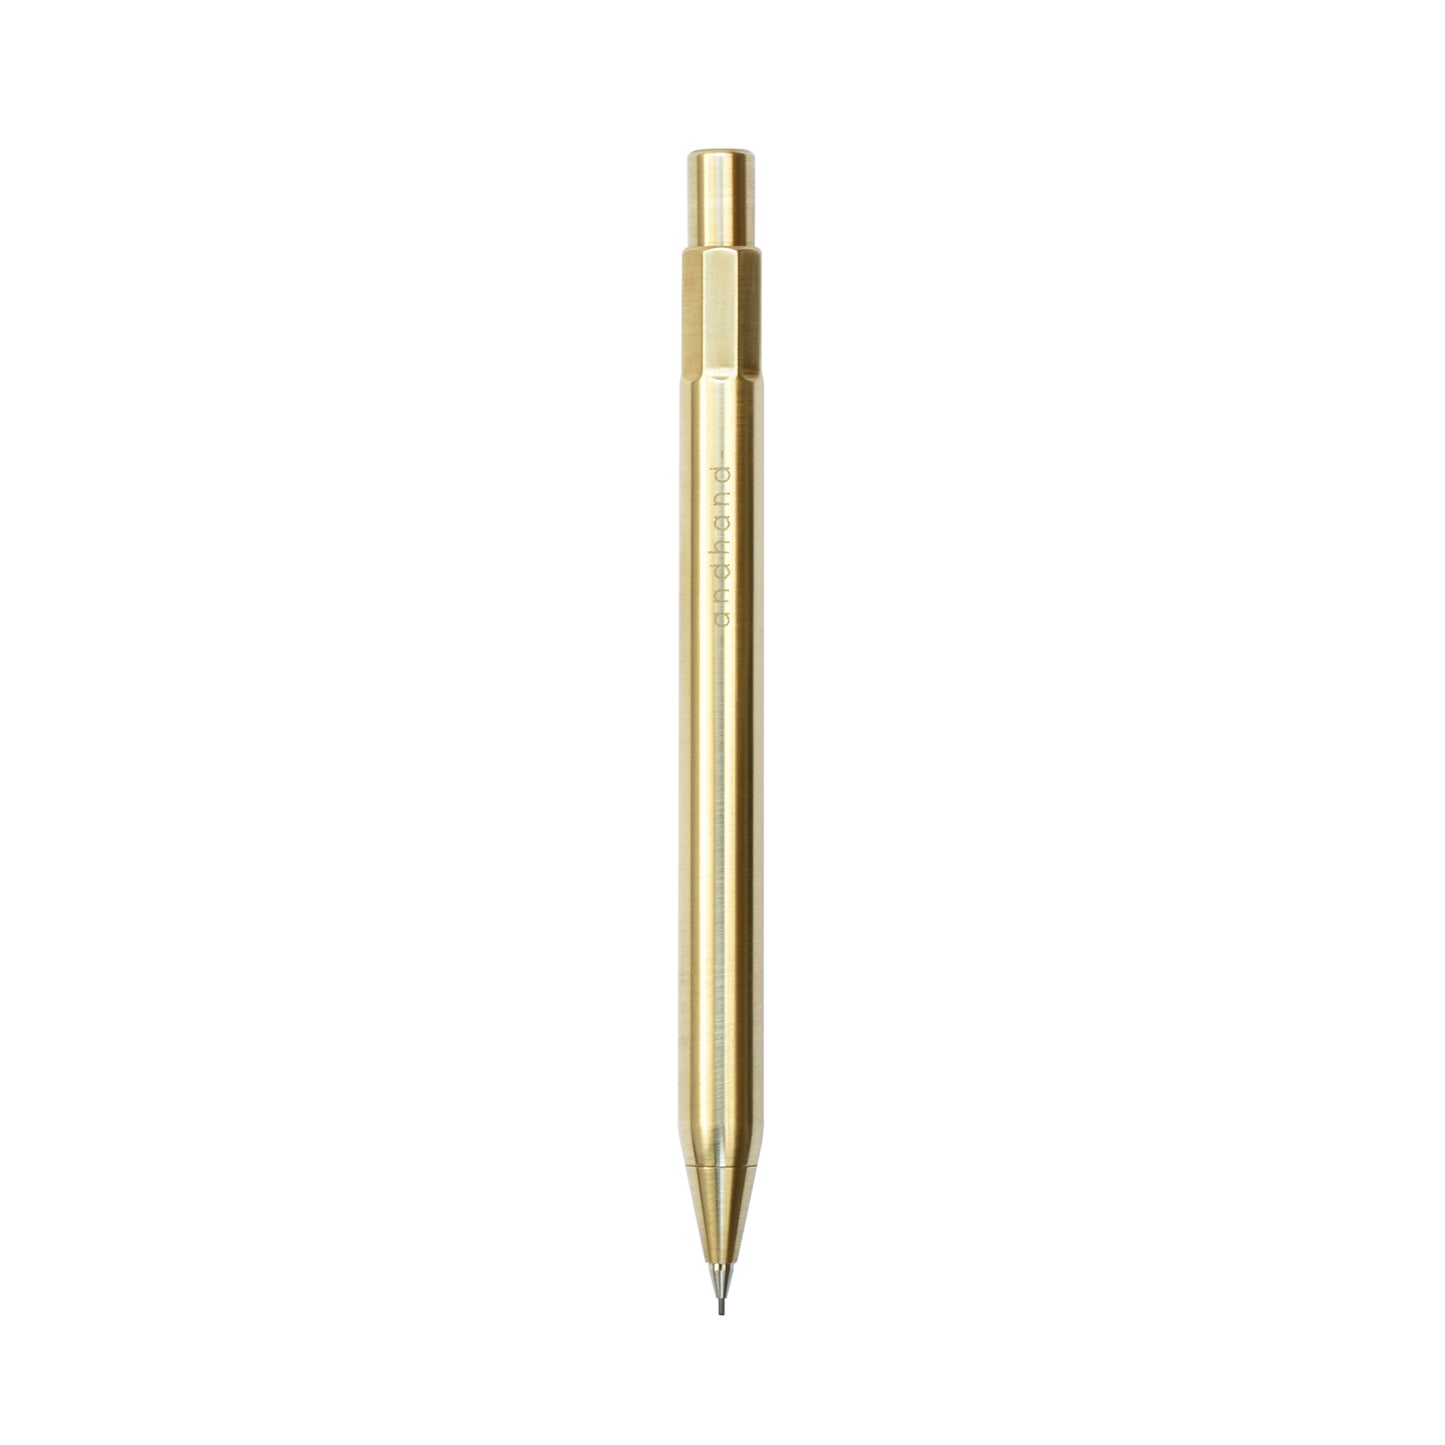 Solid brass Method Mechanical Pencil by Andhand